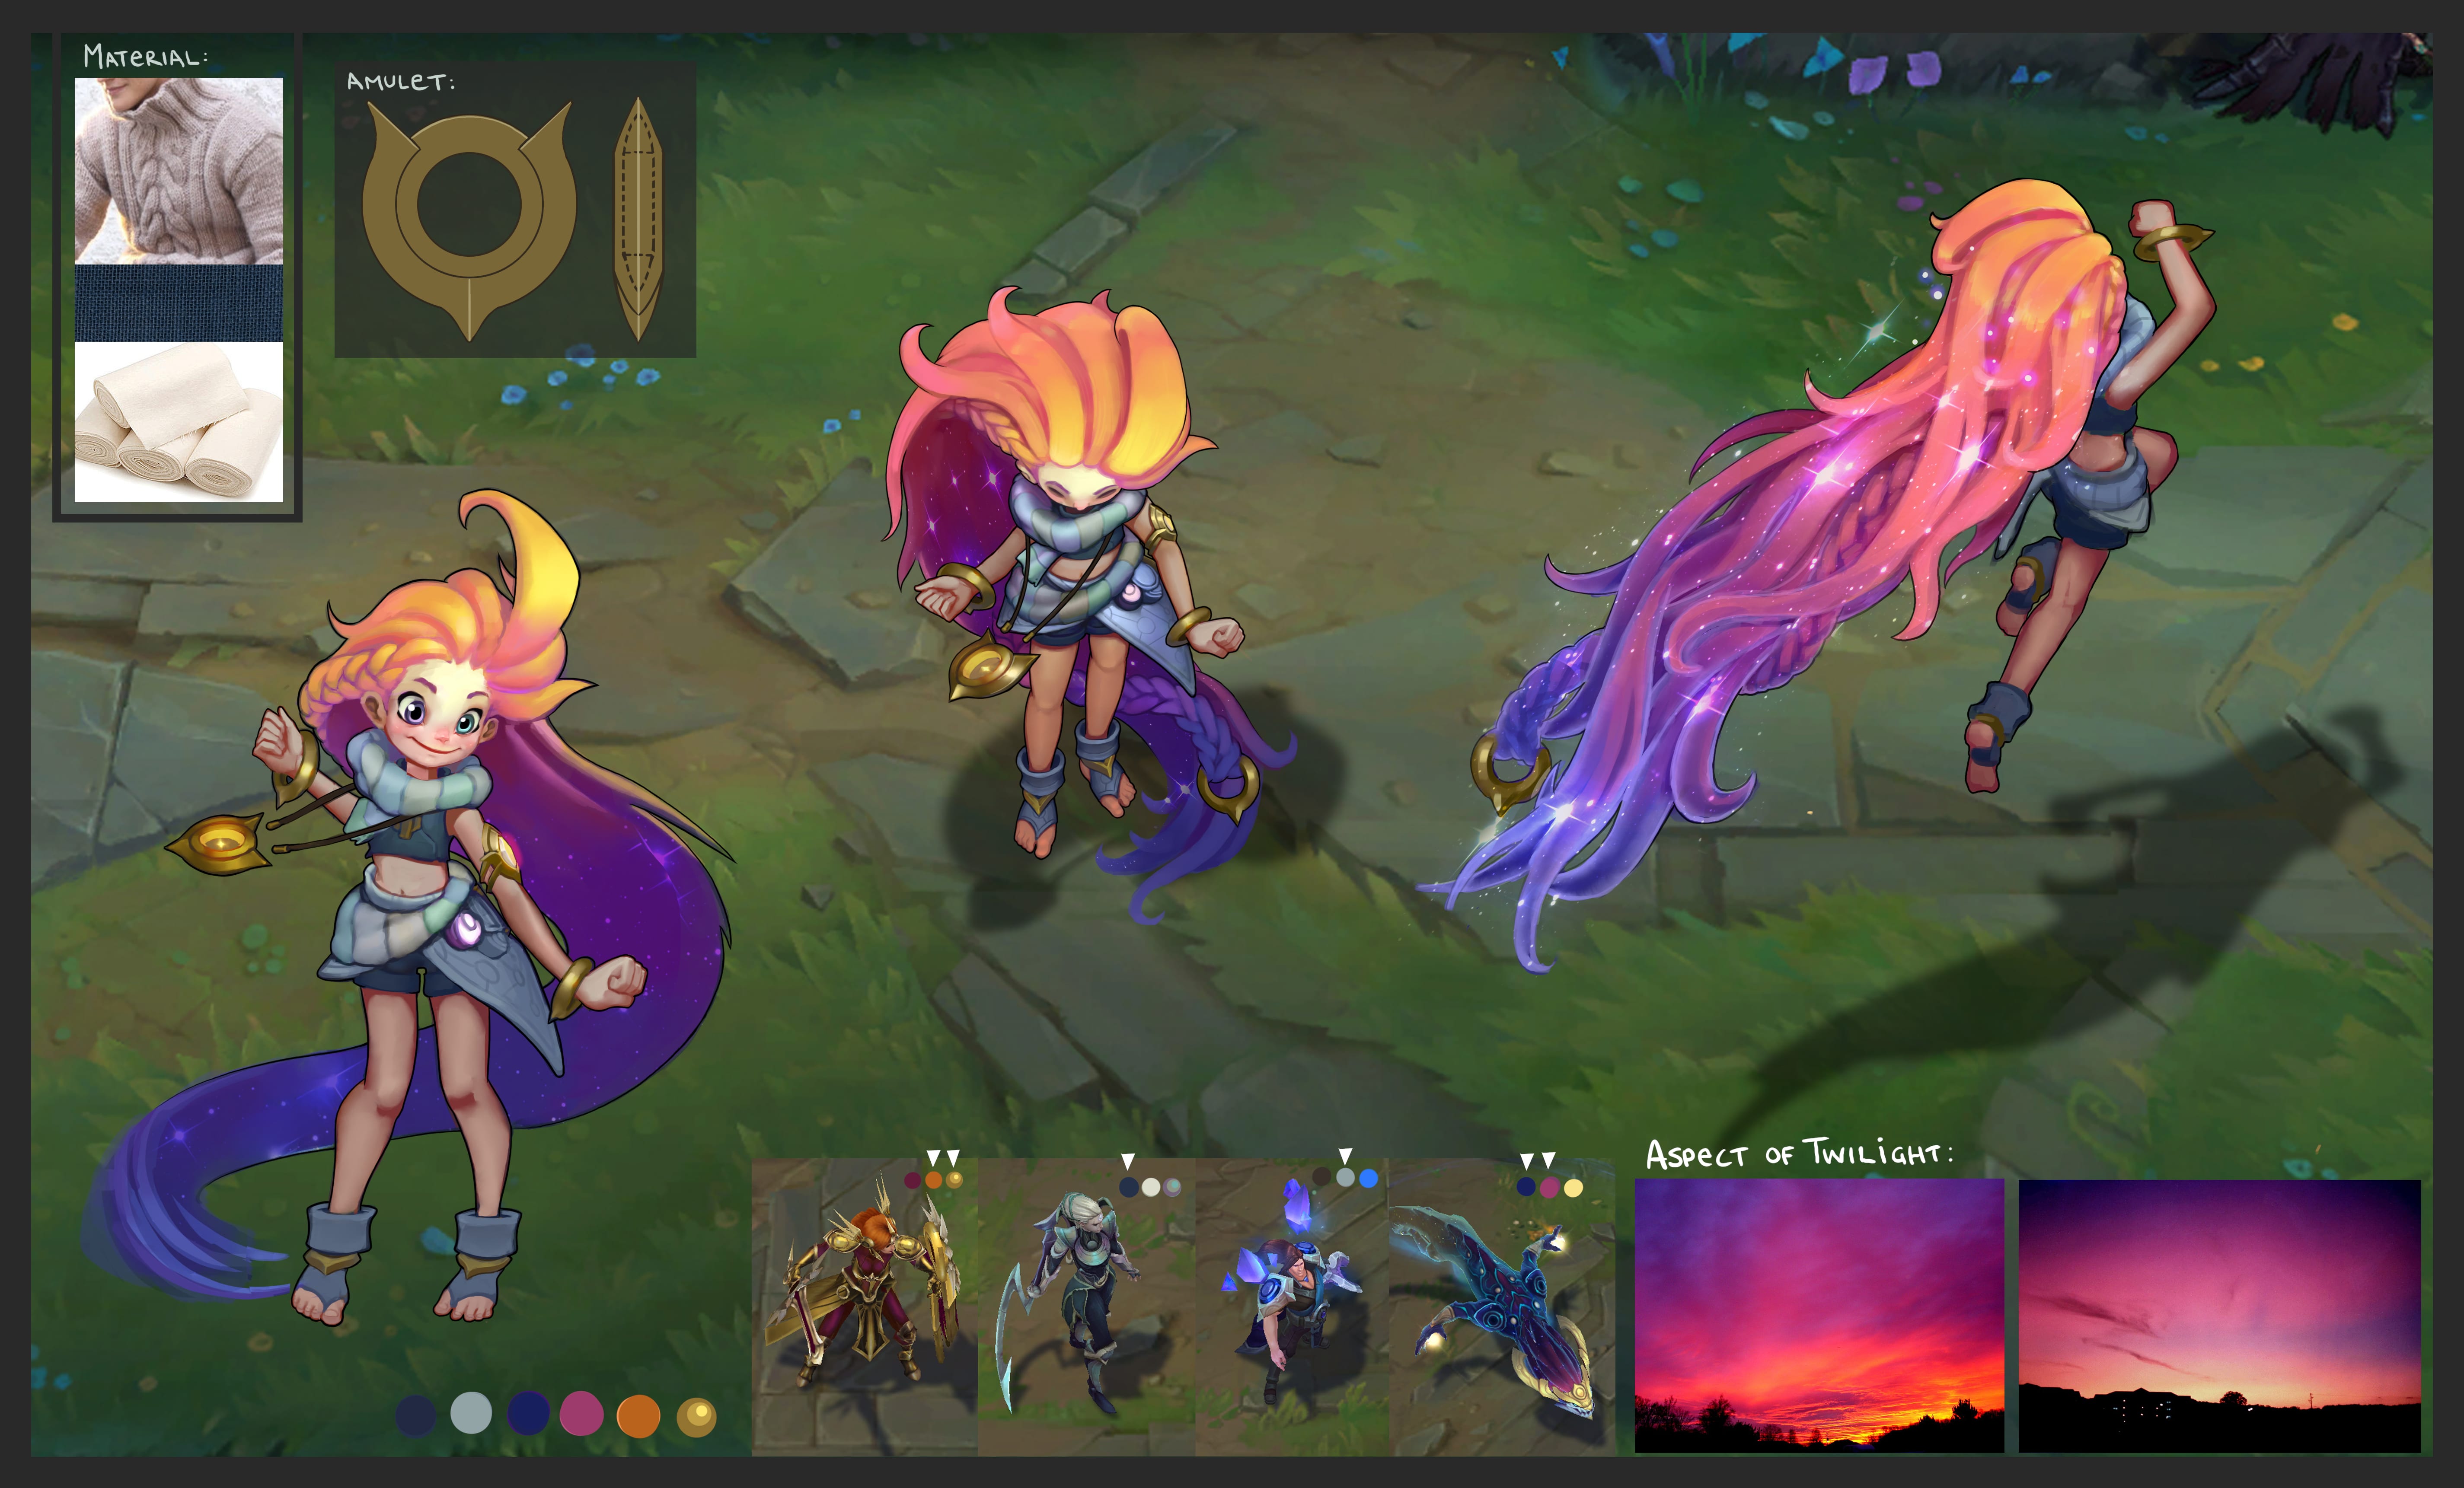 Zoe’s color palette drew from several existing Targonian champions: Golden hair from Leona, blue clothes from Diana, silver tones from Taric, and the colors of the sky from Aurelion Sol.